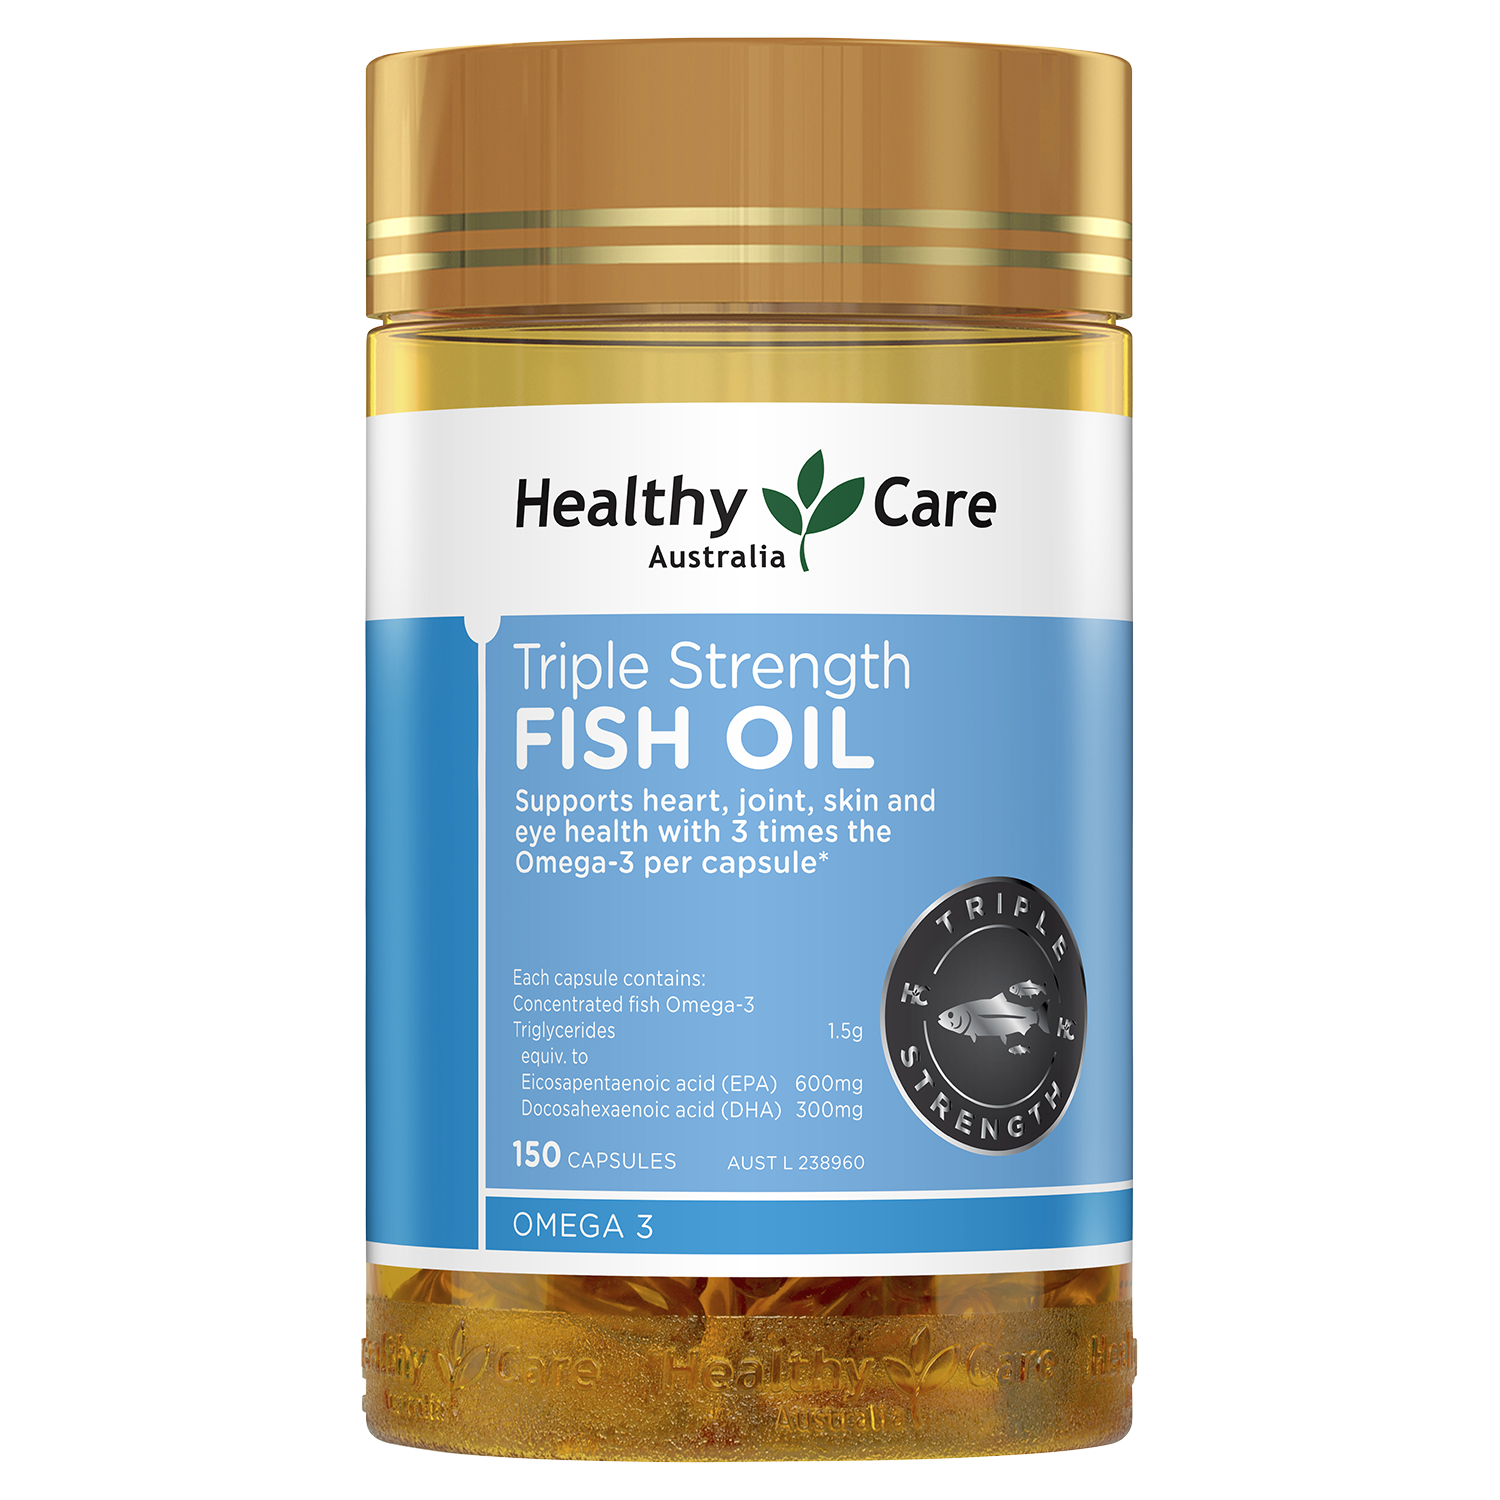 Healthy Care Triple Strength Fish Oil 150 Softgel Capsules